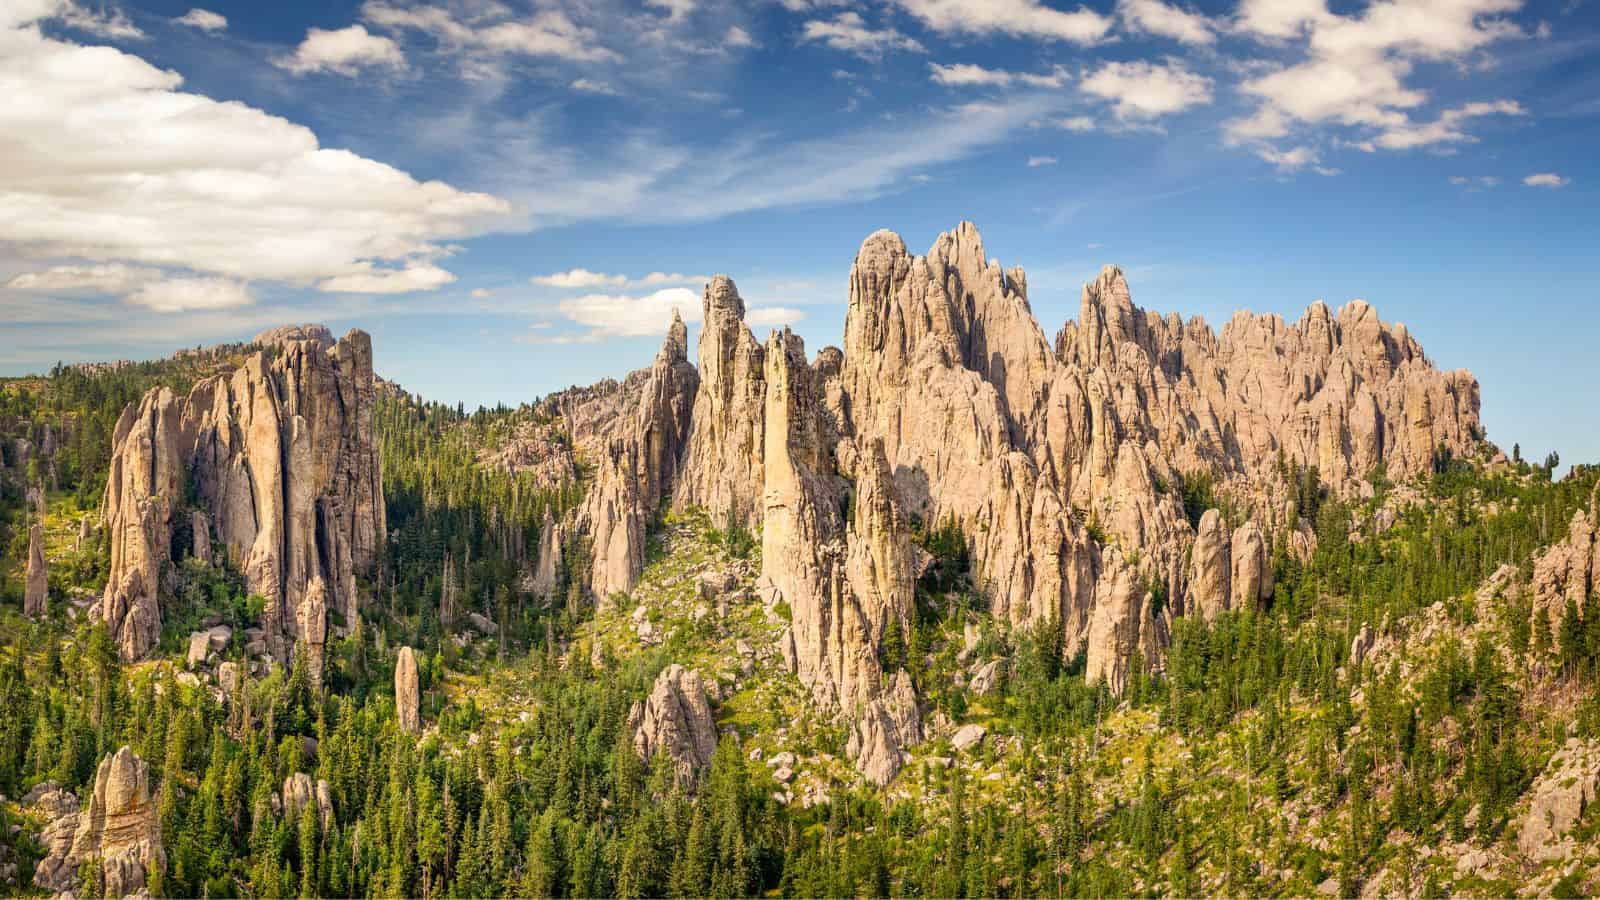 <p>Explore the iconic Black Hills of South Dakota, home to Mount Rushmore, Custer State Park, and stunning natural landscapes.</p><p>This 125-mile route takes you through some of South Dakota’s most famous attractions, including <a href="https://whatthefab.com/south-dakota-national-parks.html" rel="follow">Badlands National Park</a>, Wind Cave National Park, and the Crazy Horse Memorial. During your drive, you can also discover historic towns like Deadwood and Lead.</p><p>The best time to drive this route is in the fall when the foliage turns vibrant shades of red, orange, and yellow, creating a colorful backdrop against the rock formations.</p>